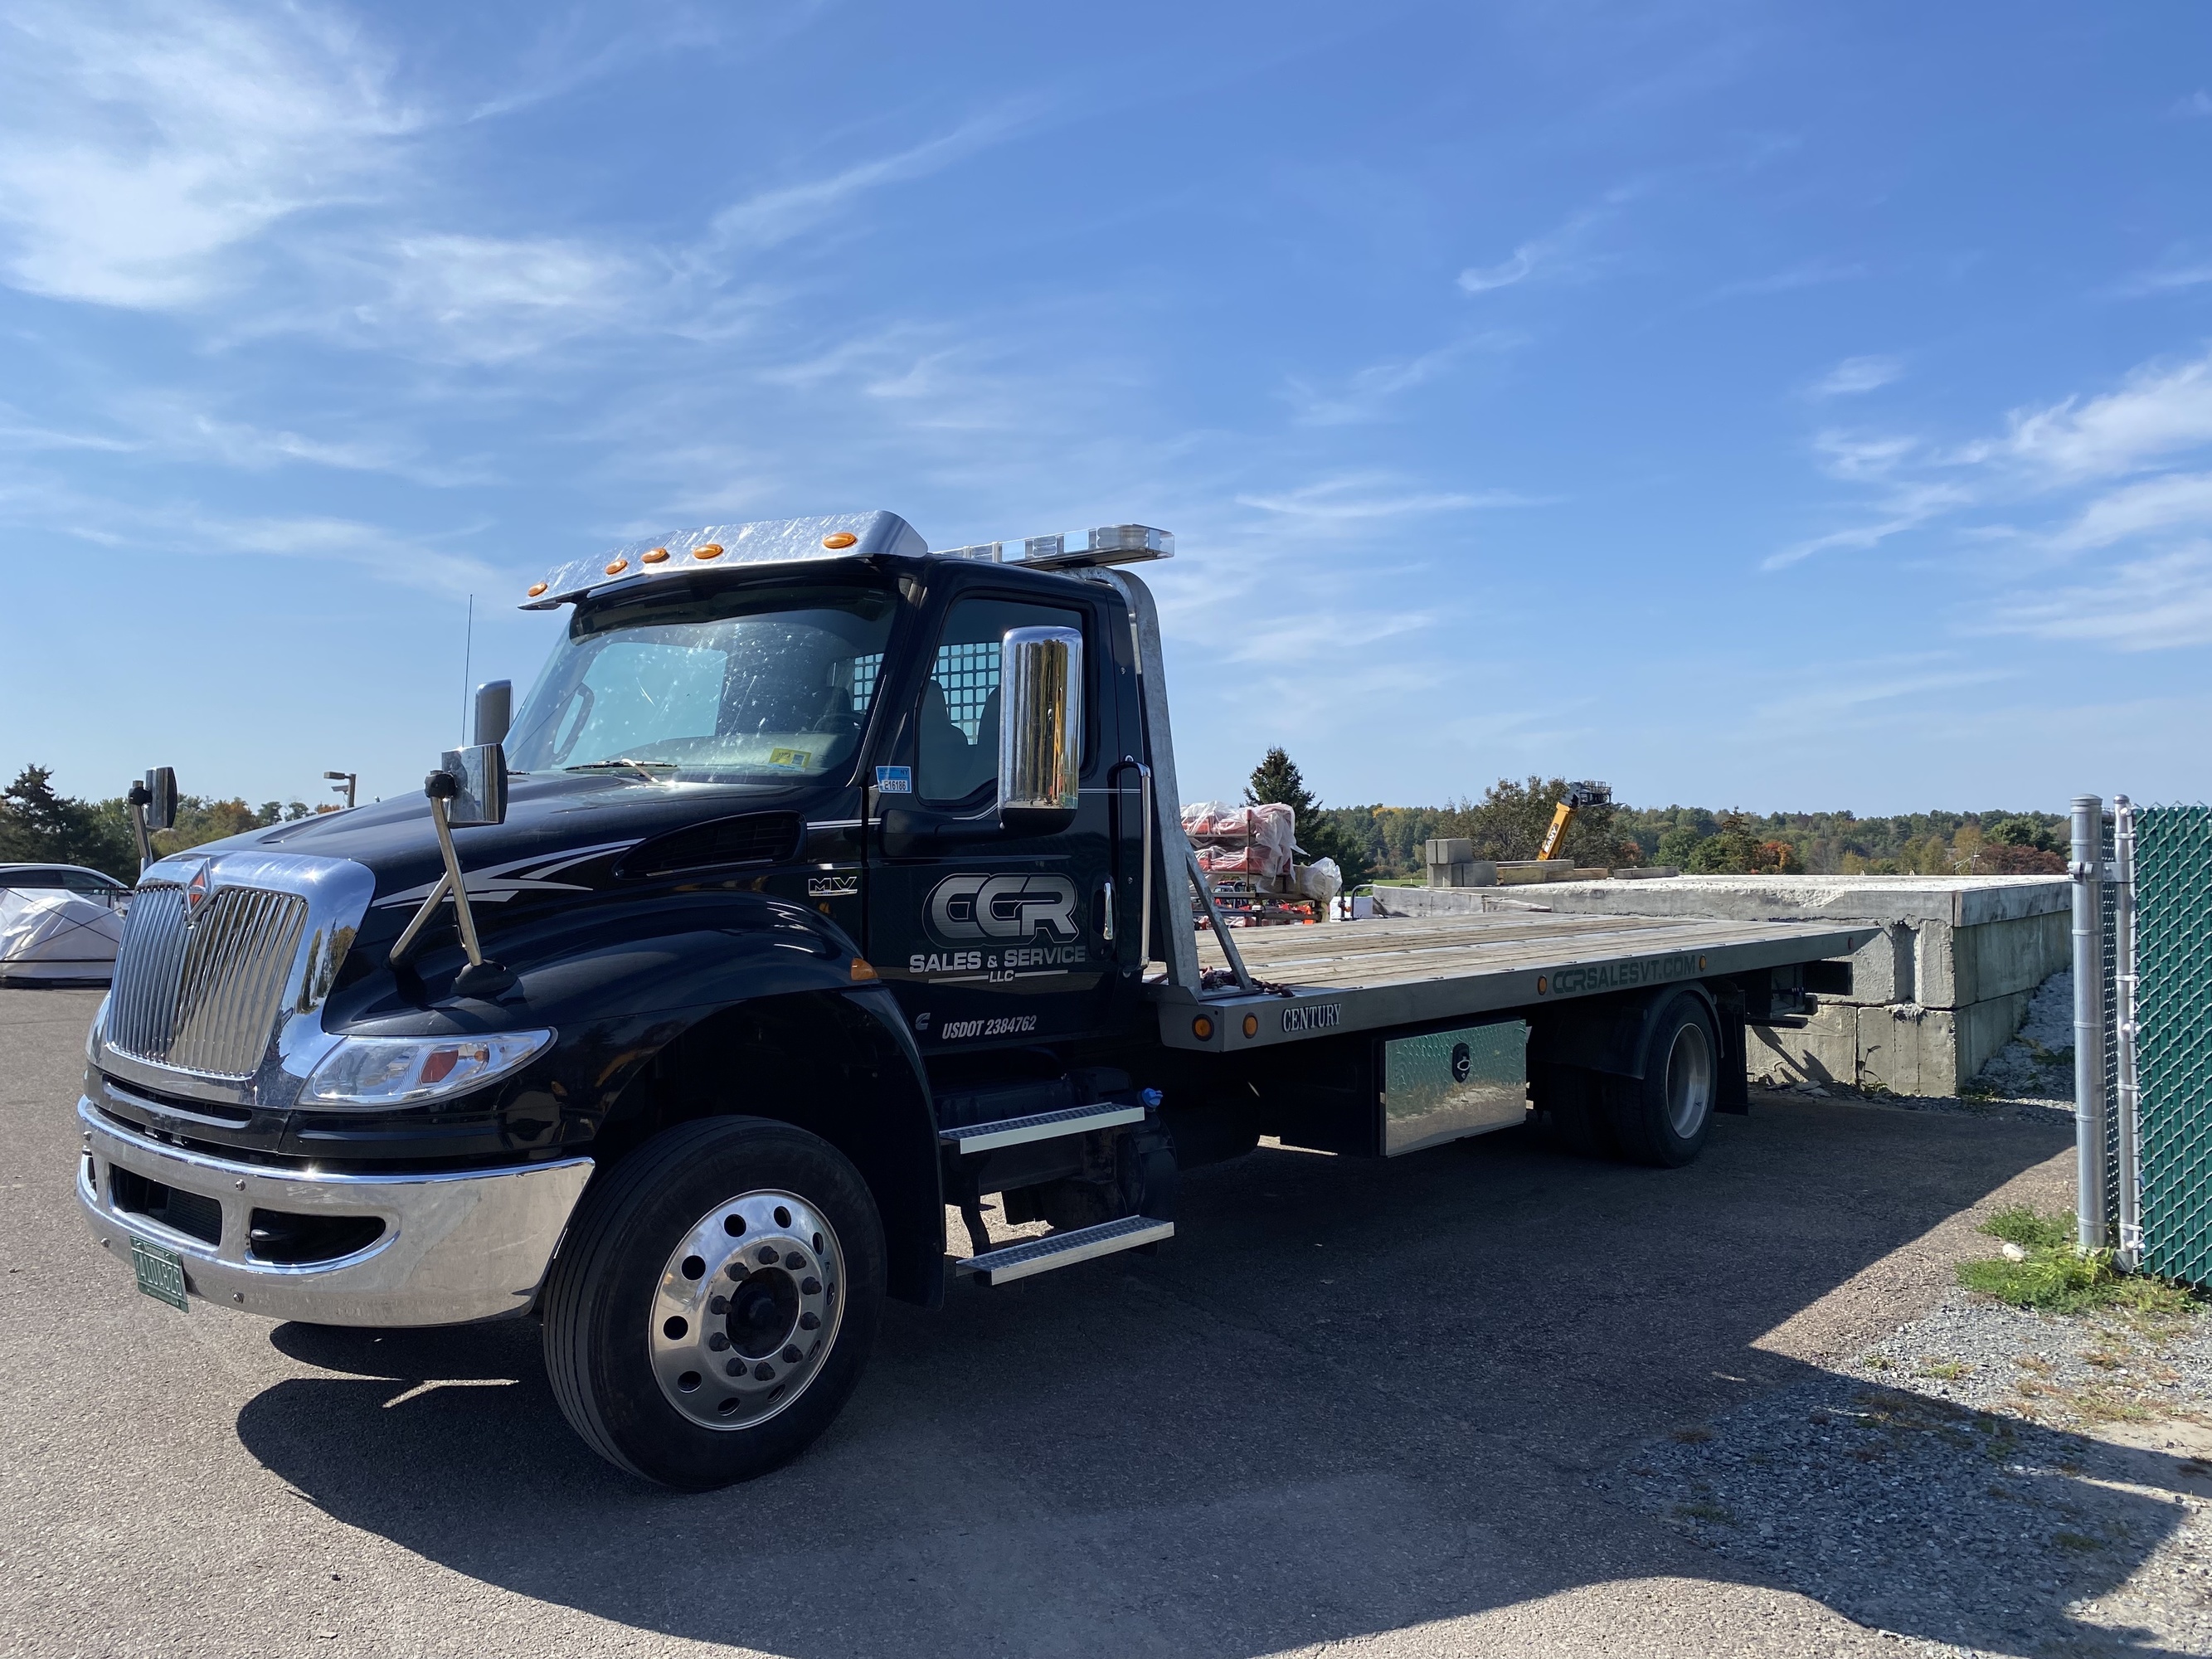 EBY TRUCK BODIES for sale + install at CCR Sales and Service, Essex Junction, VT